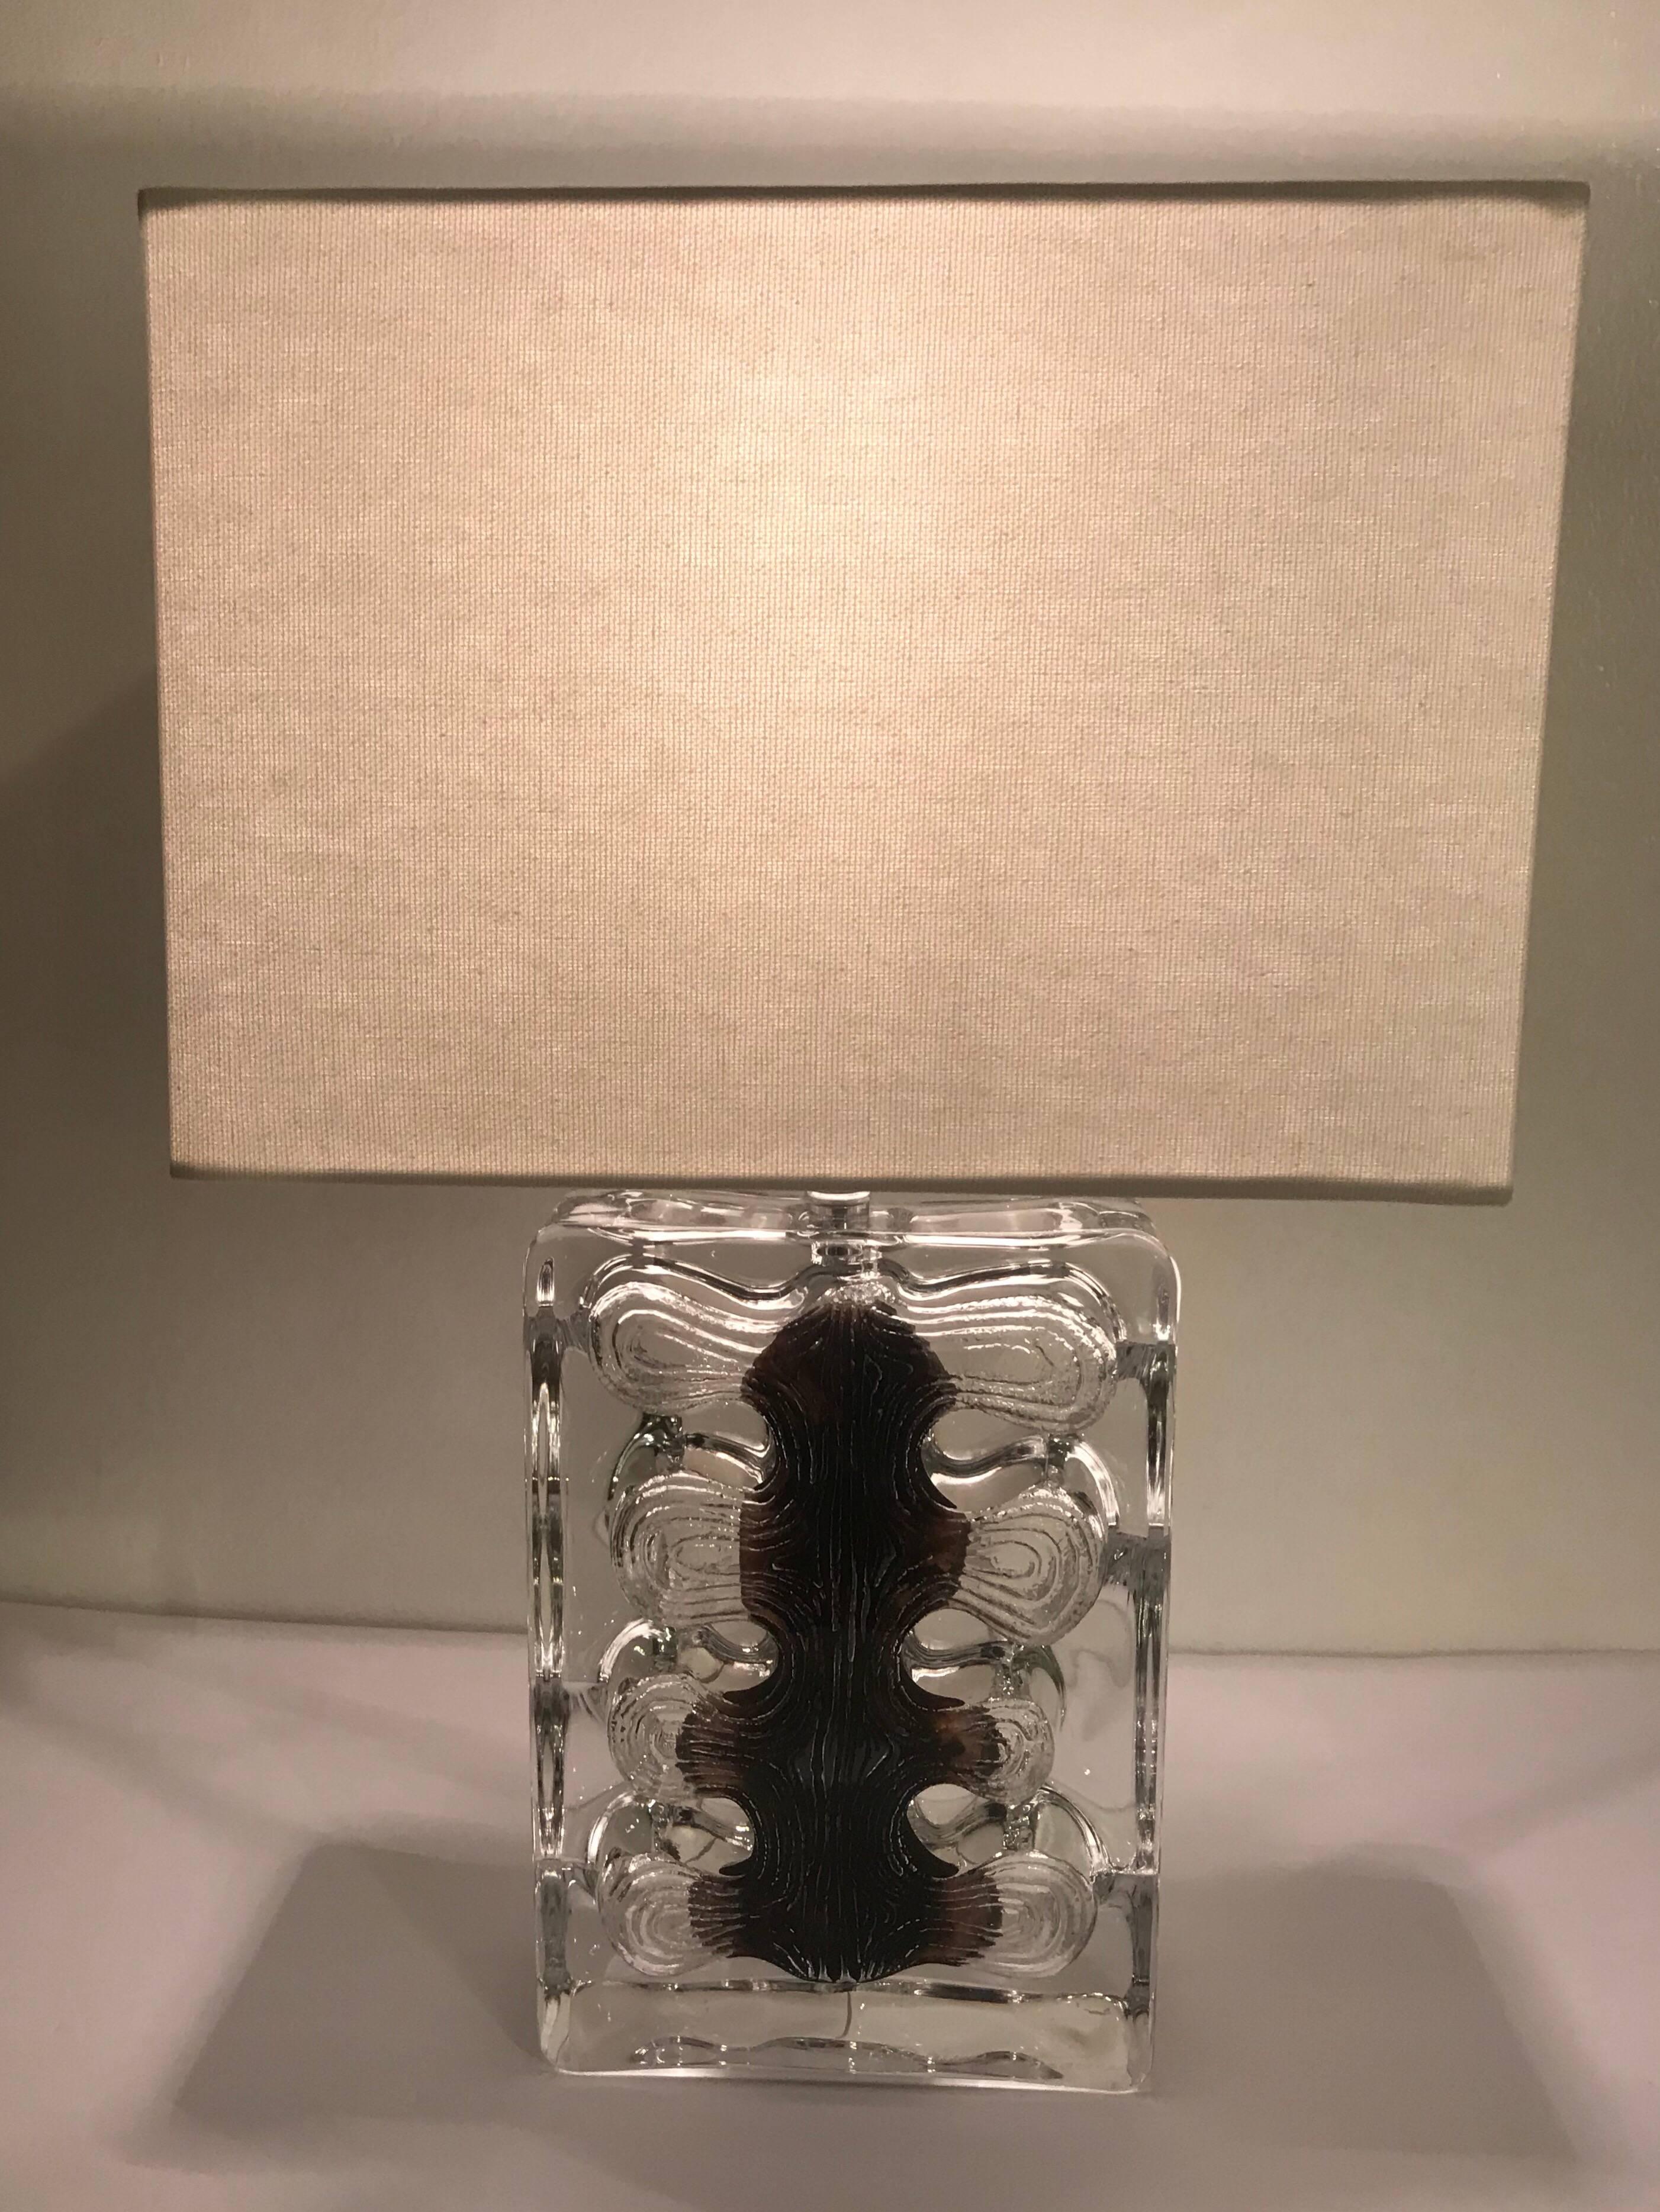 A luxurious 1970s solid thick French crystal fossil style table lamp with chrome fittings by the famed glass maker, Daum. Newly rewired with silk cord. Signed. 8” to top of the glass.

Daum (French, est. 1878) is a crystal and glass studio based in